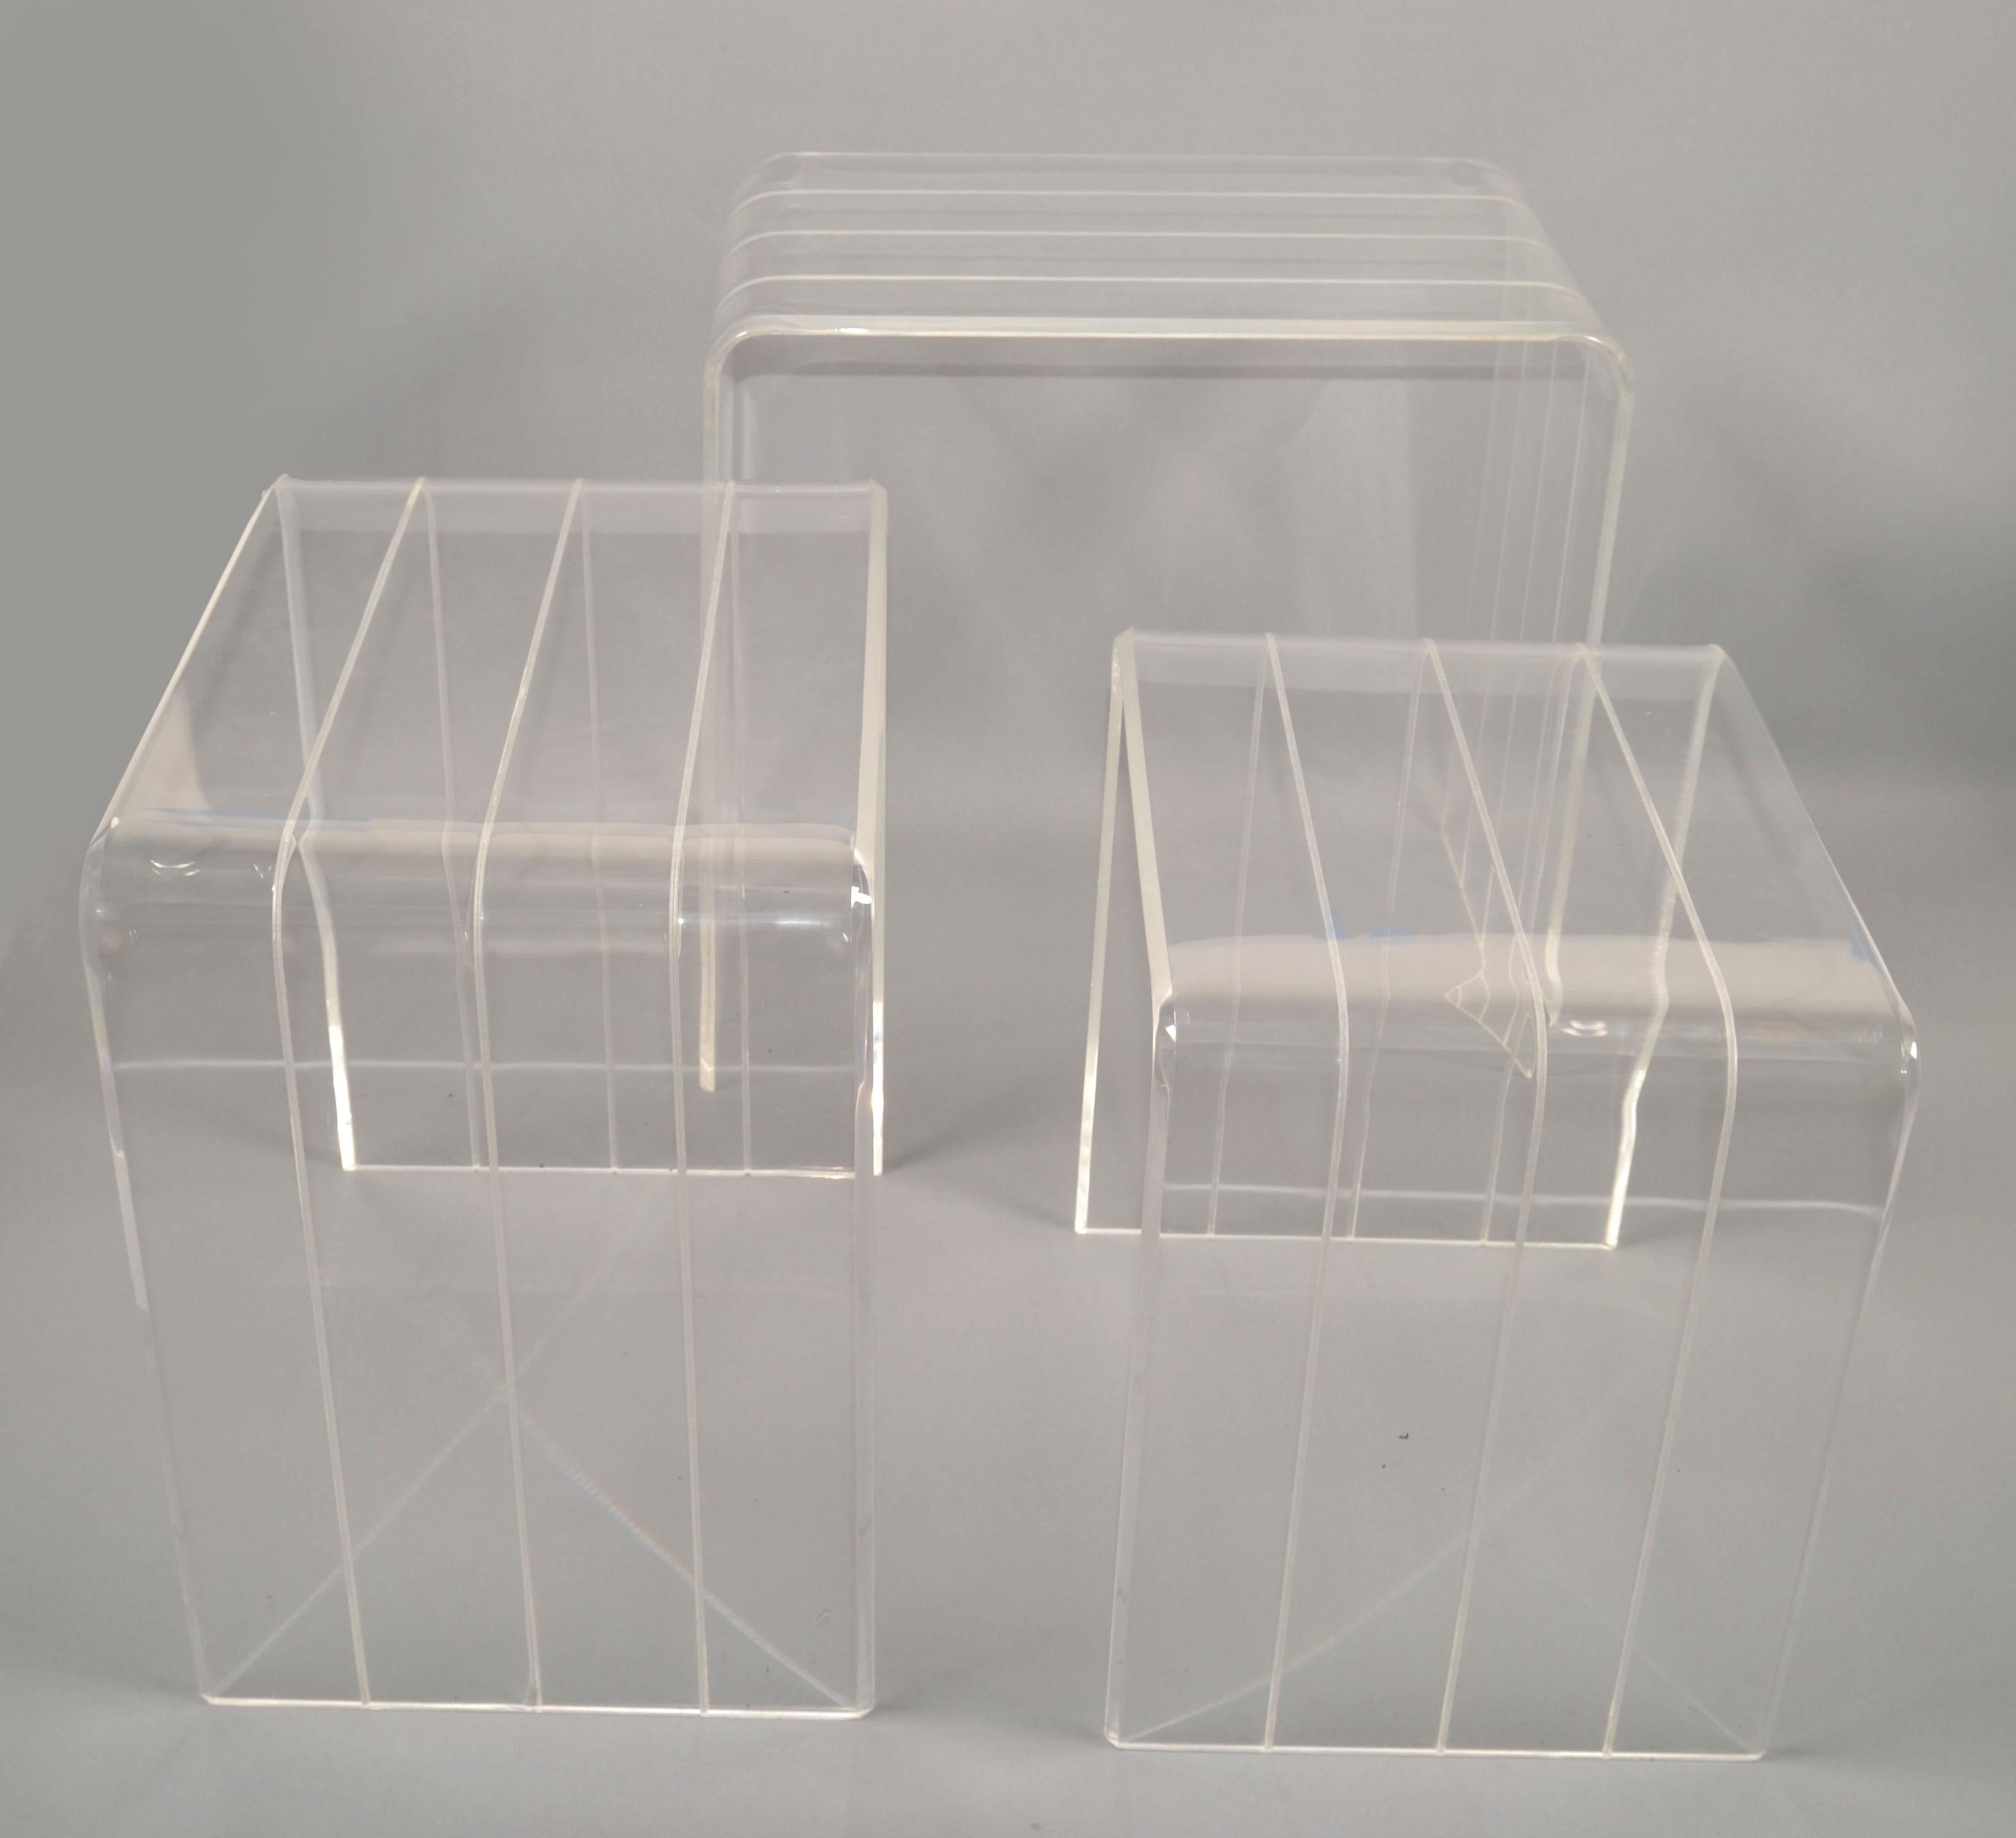 Set 3 Italian Etched Lucite Waterfall Nesting Tables Stacking Tables Stools 1970 For Sale 4